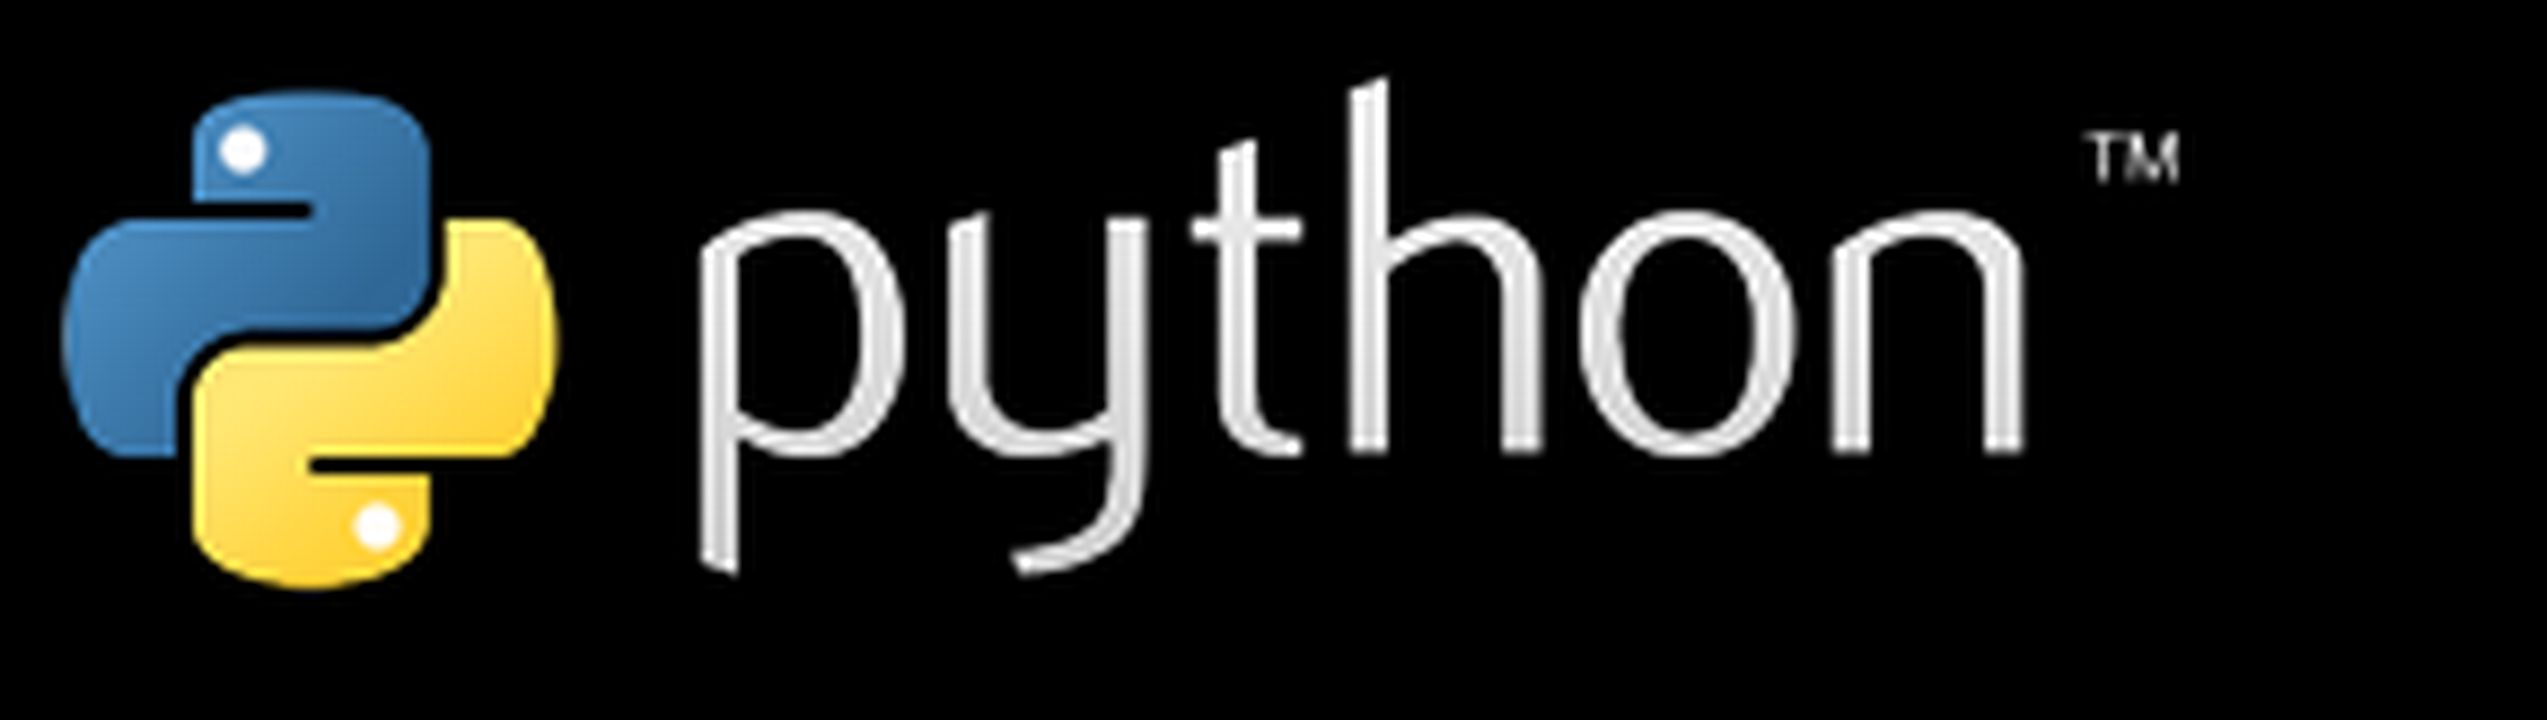 Python 3.12.3 and 3.13.0a6 released